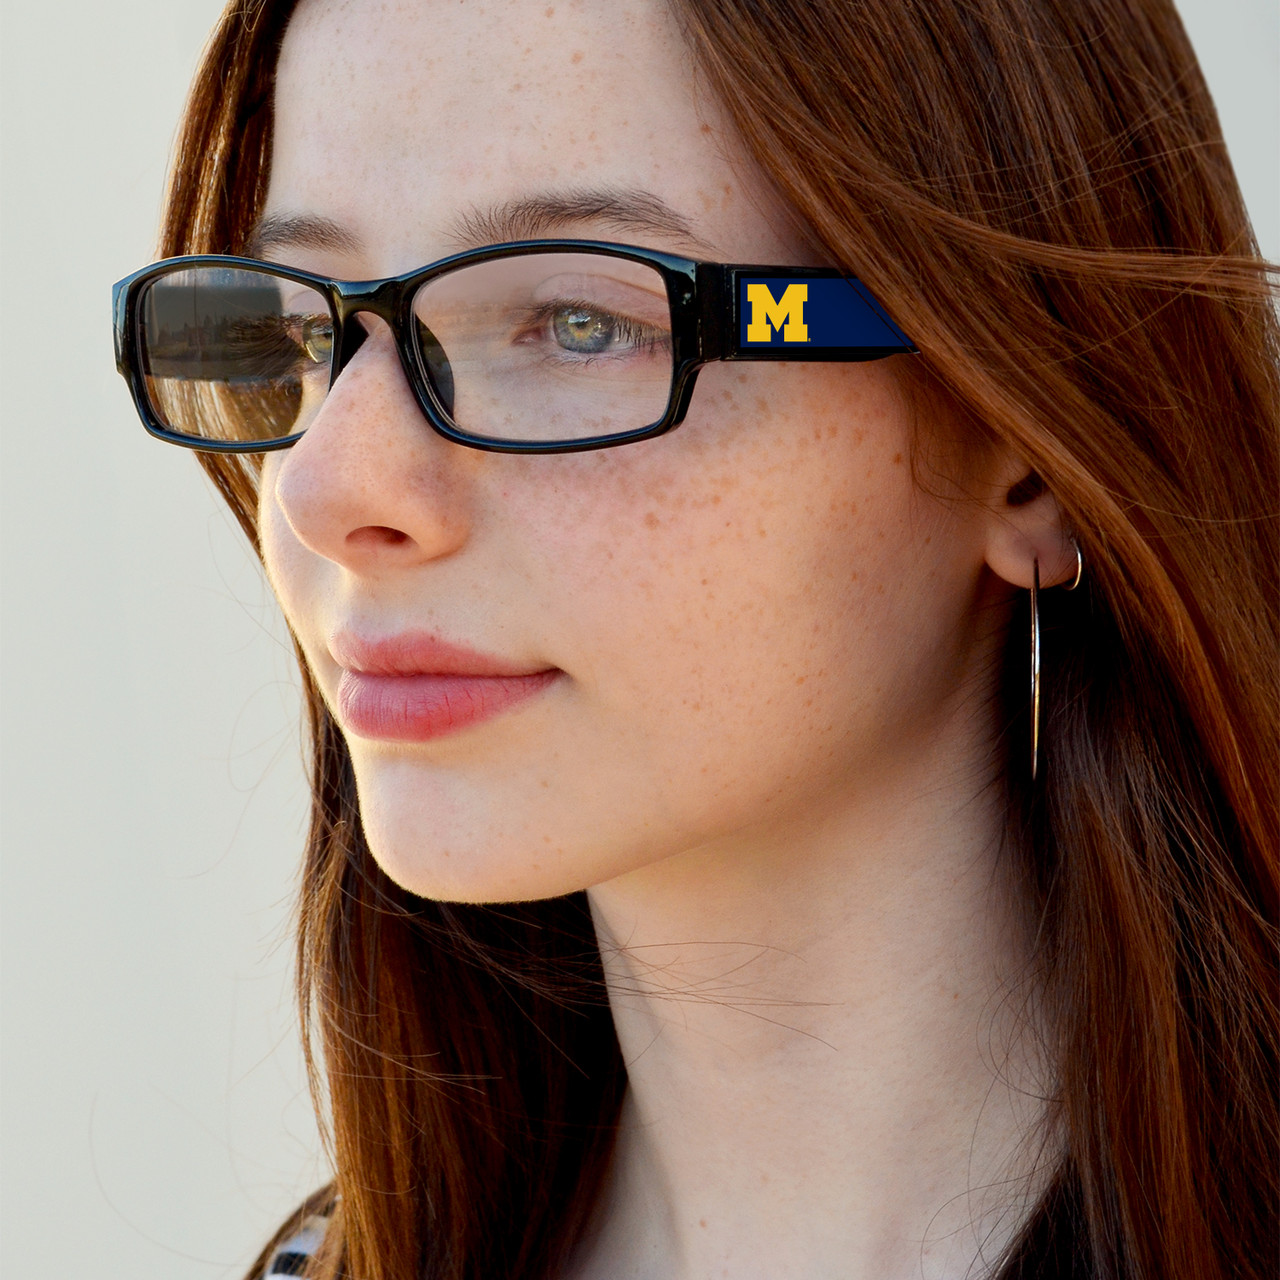 Michigan Wolverines Readers with Case- Gameday